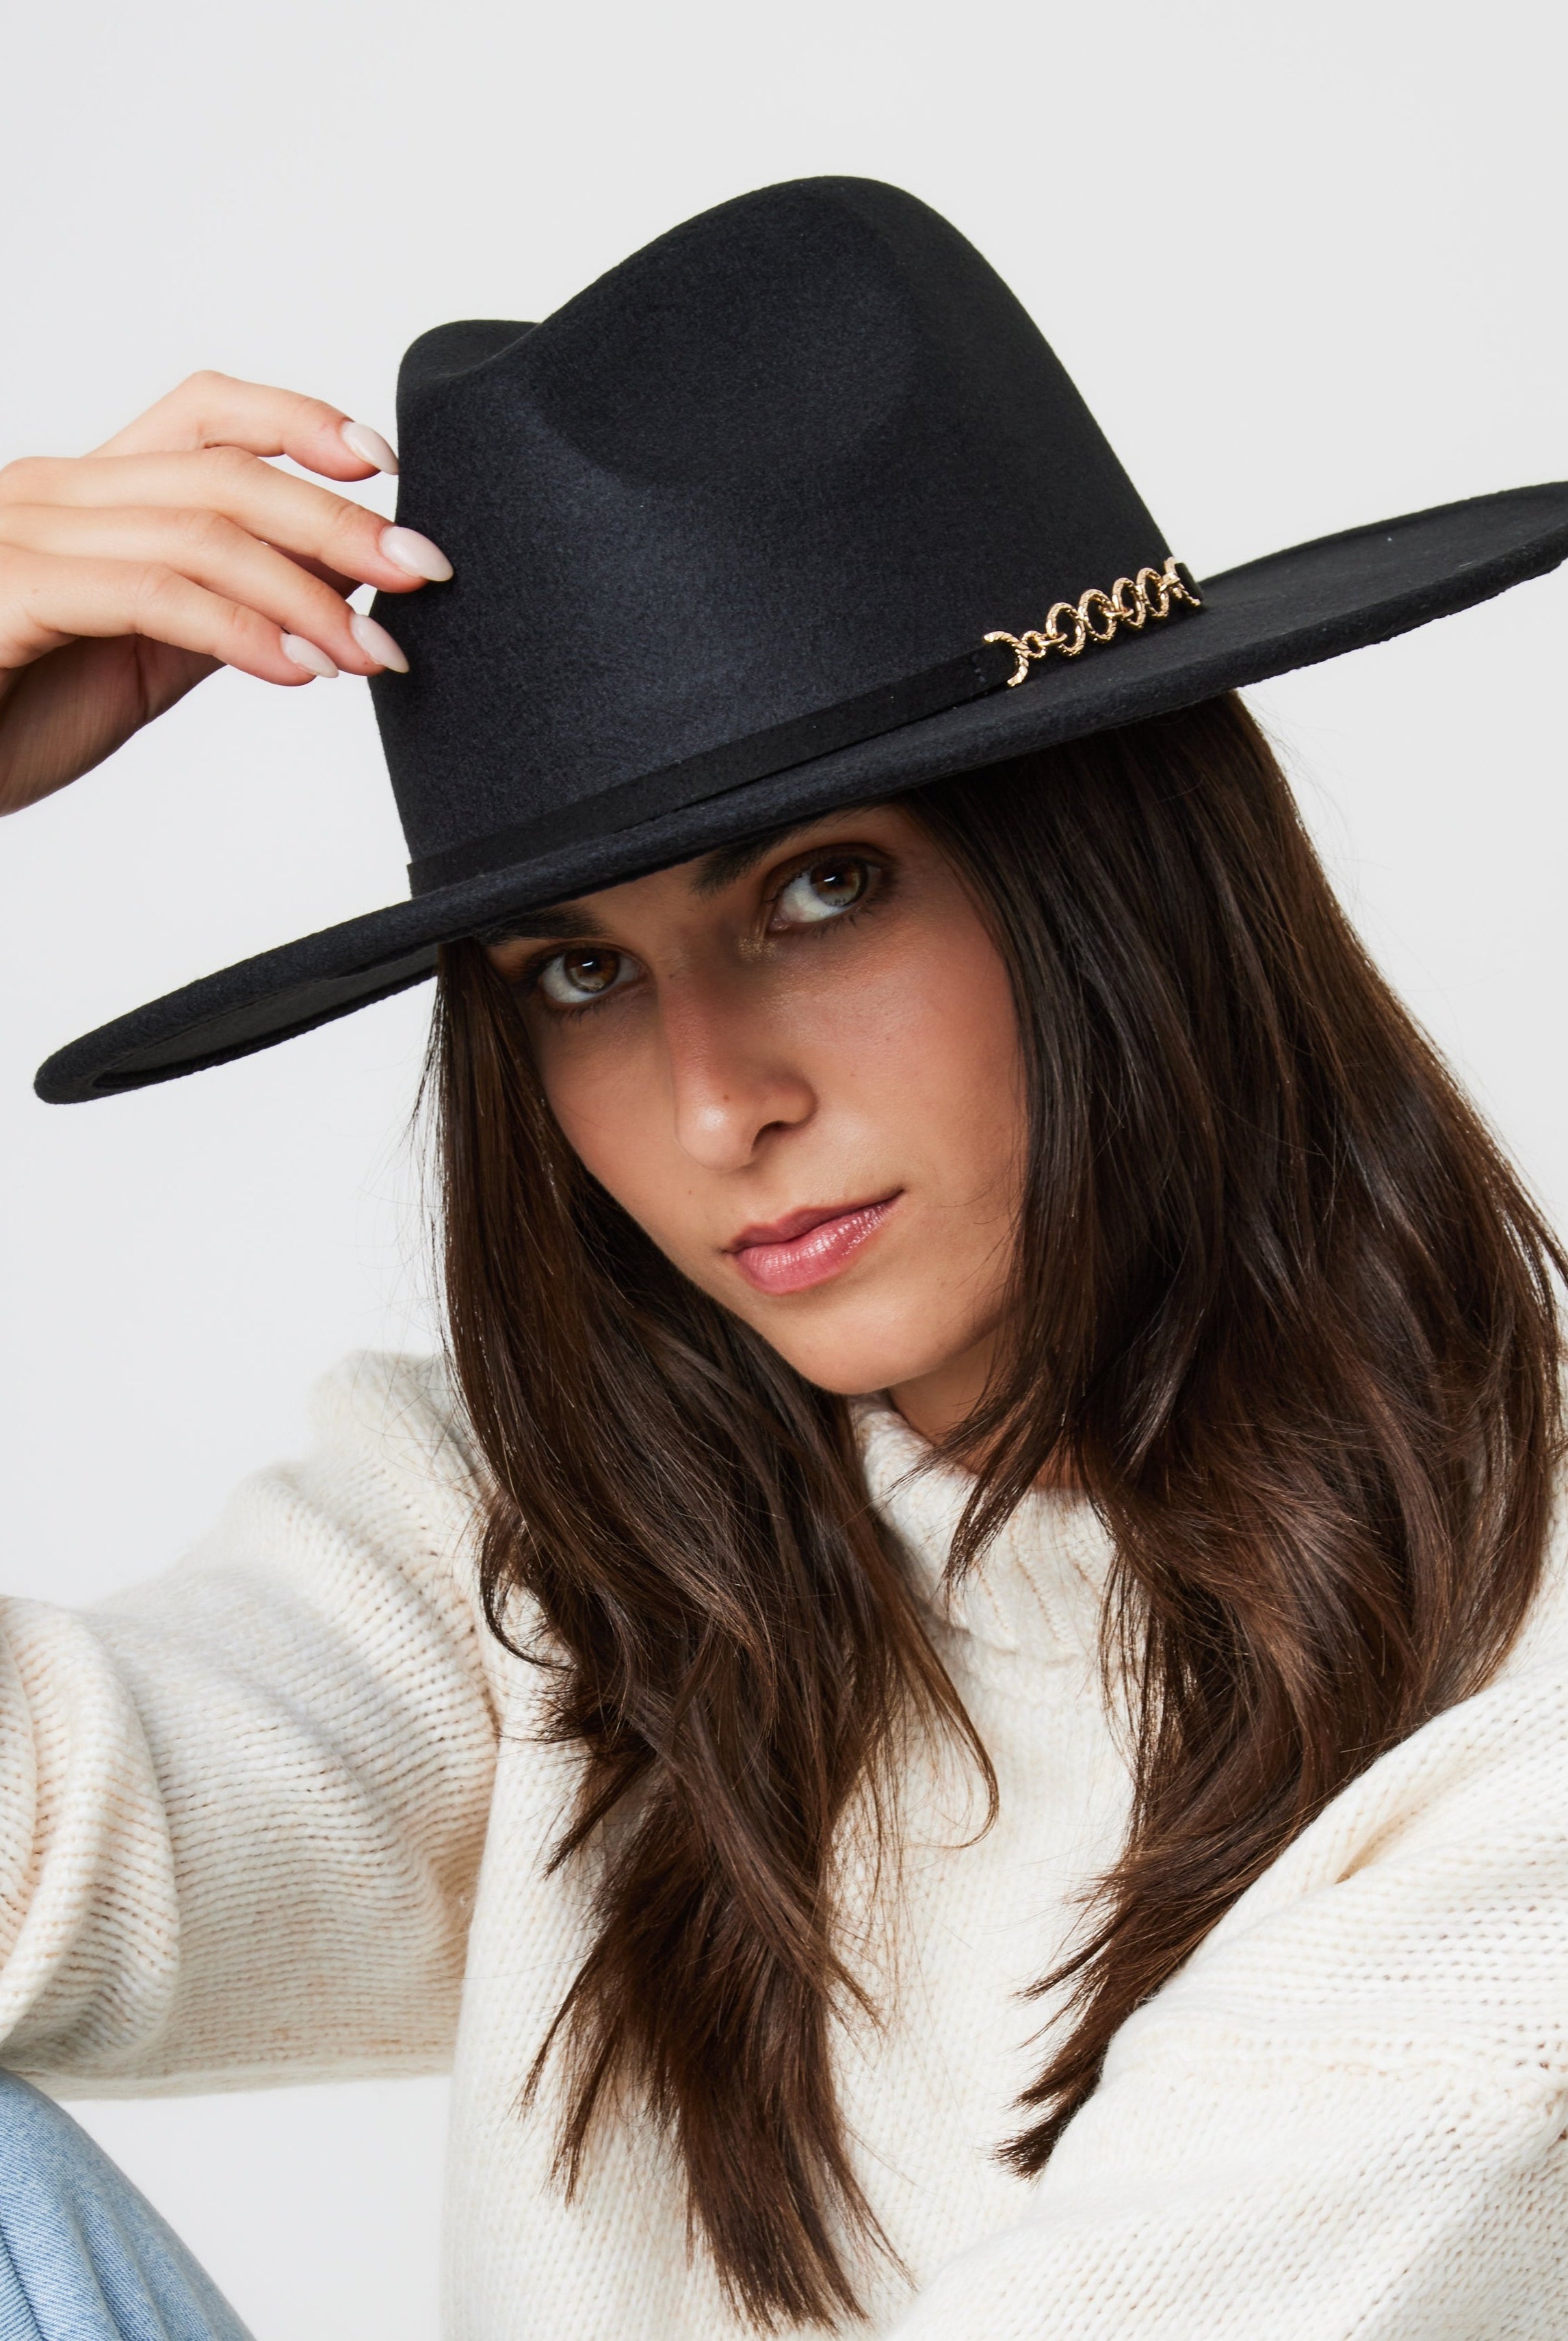 Oversized Fedora Hat in Black with Buckle detail and size adjuster | Winter | Autumn | Walks | Pub | Casual | Oversized | Hat | Accessory | Accessories | twee | Old money | Plaza core | Country | Streetwear | Indie  